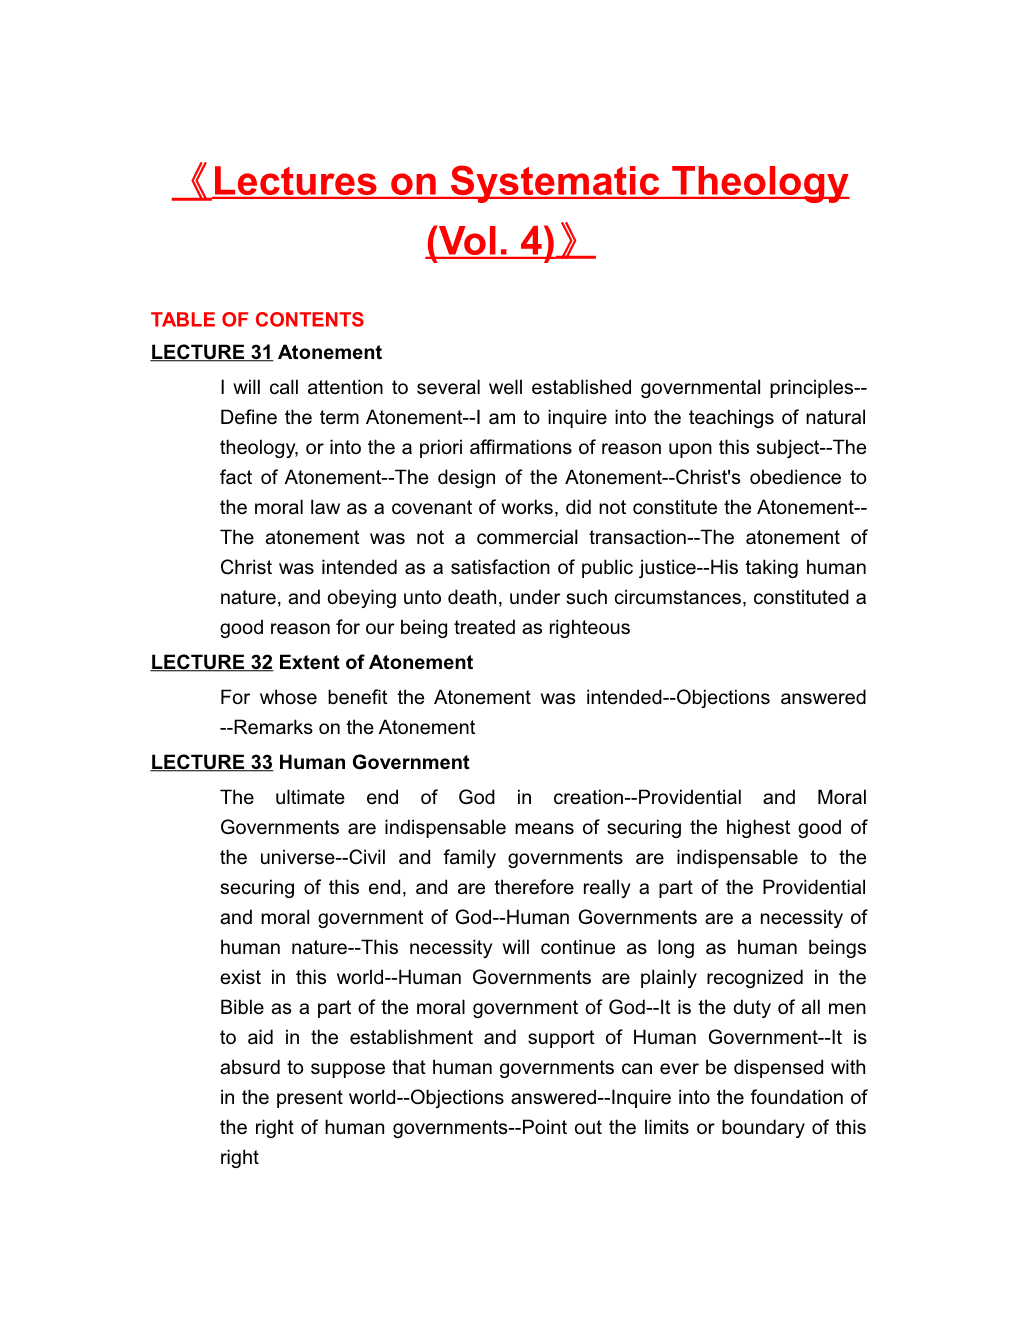 Lectures on Systematic Theology (Vol. 4)